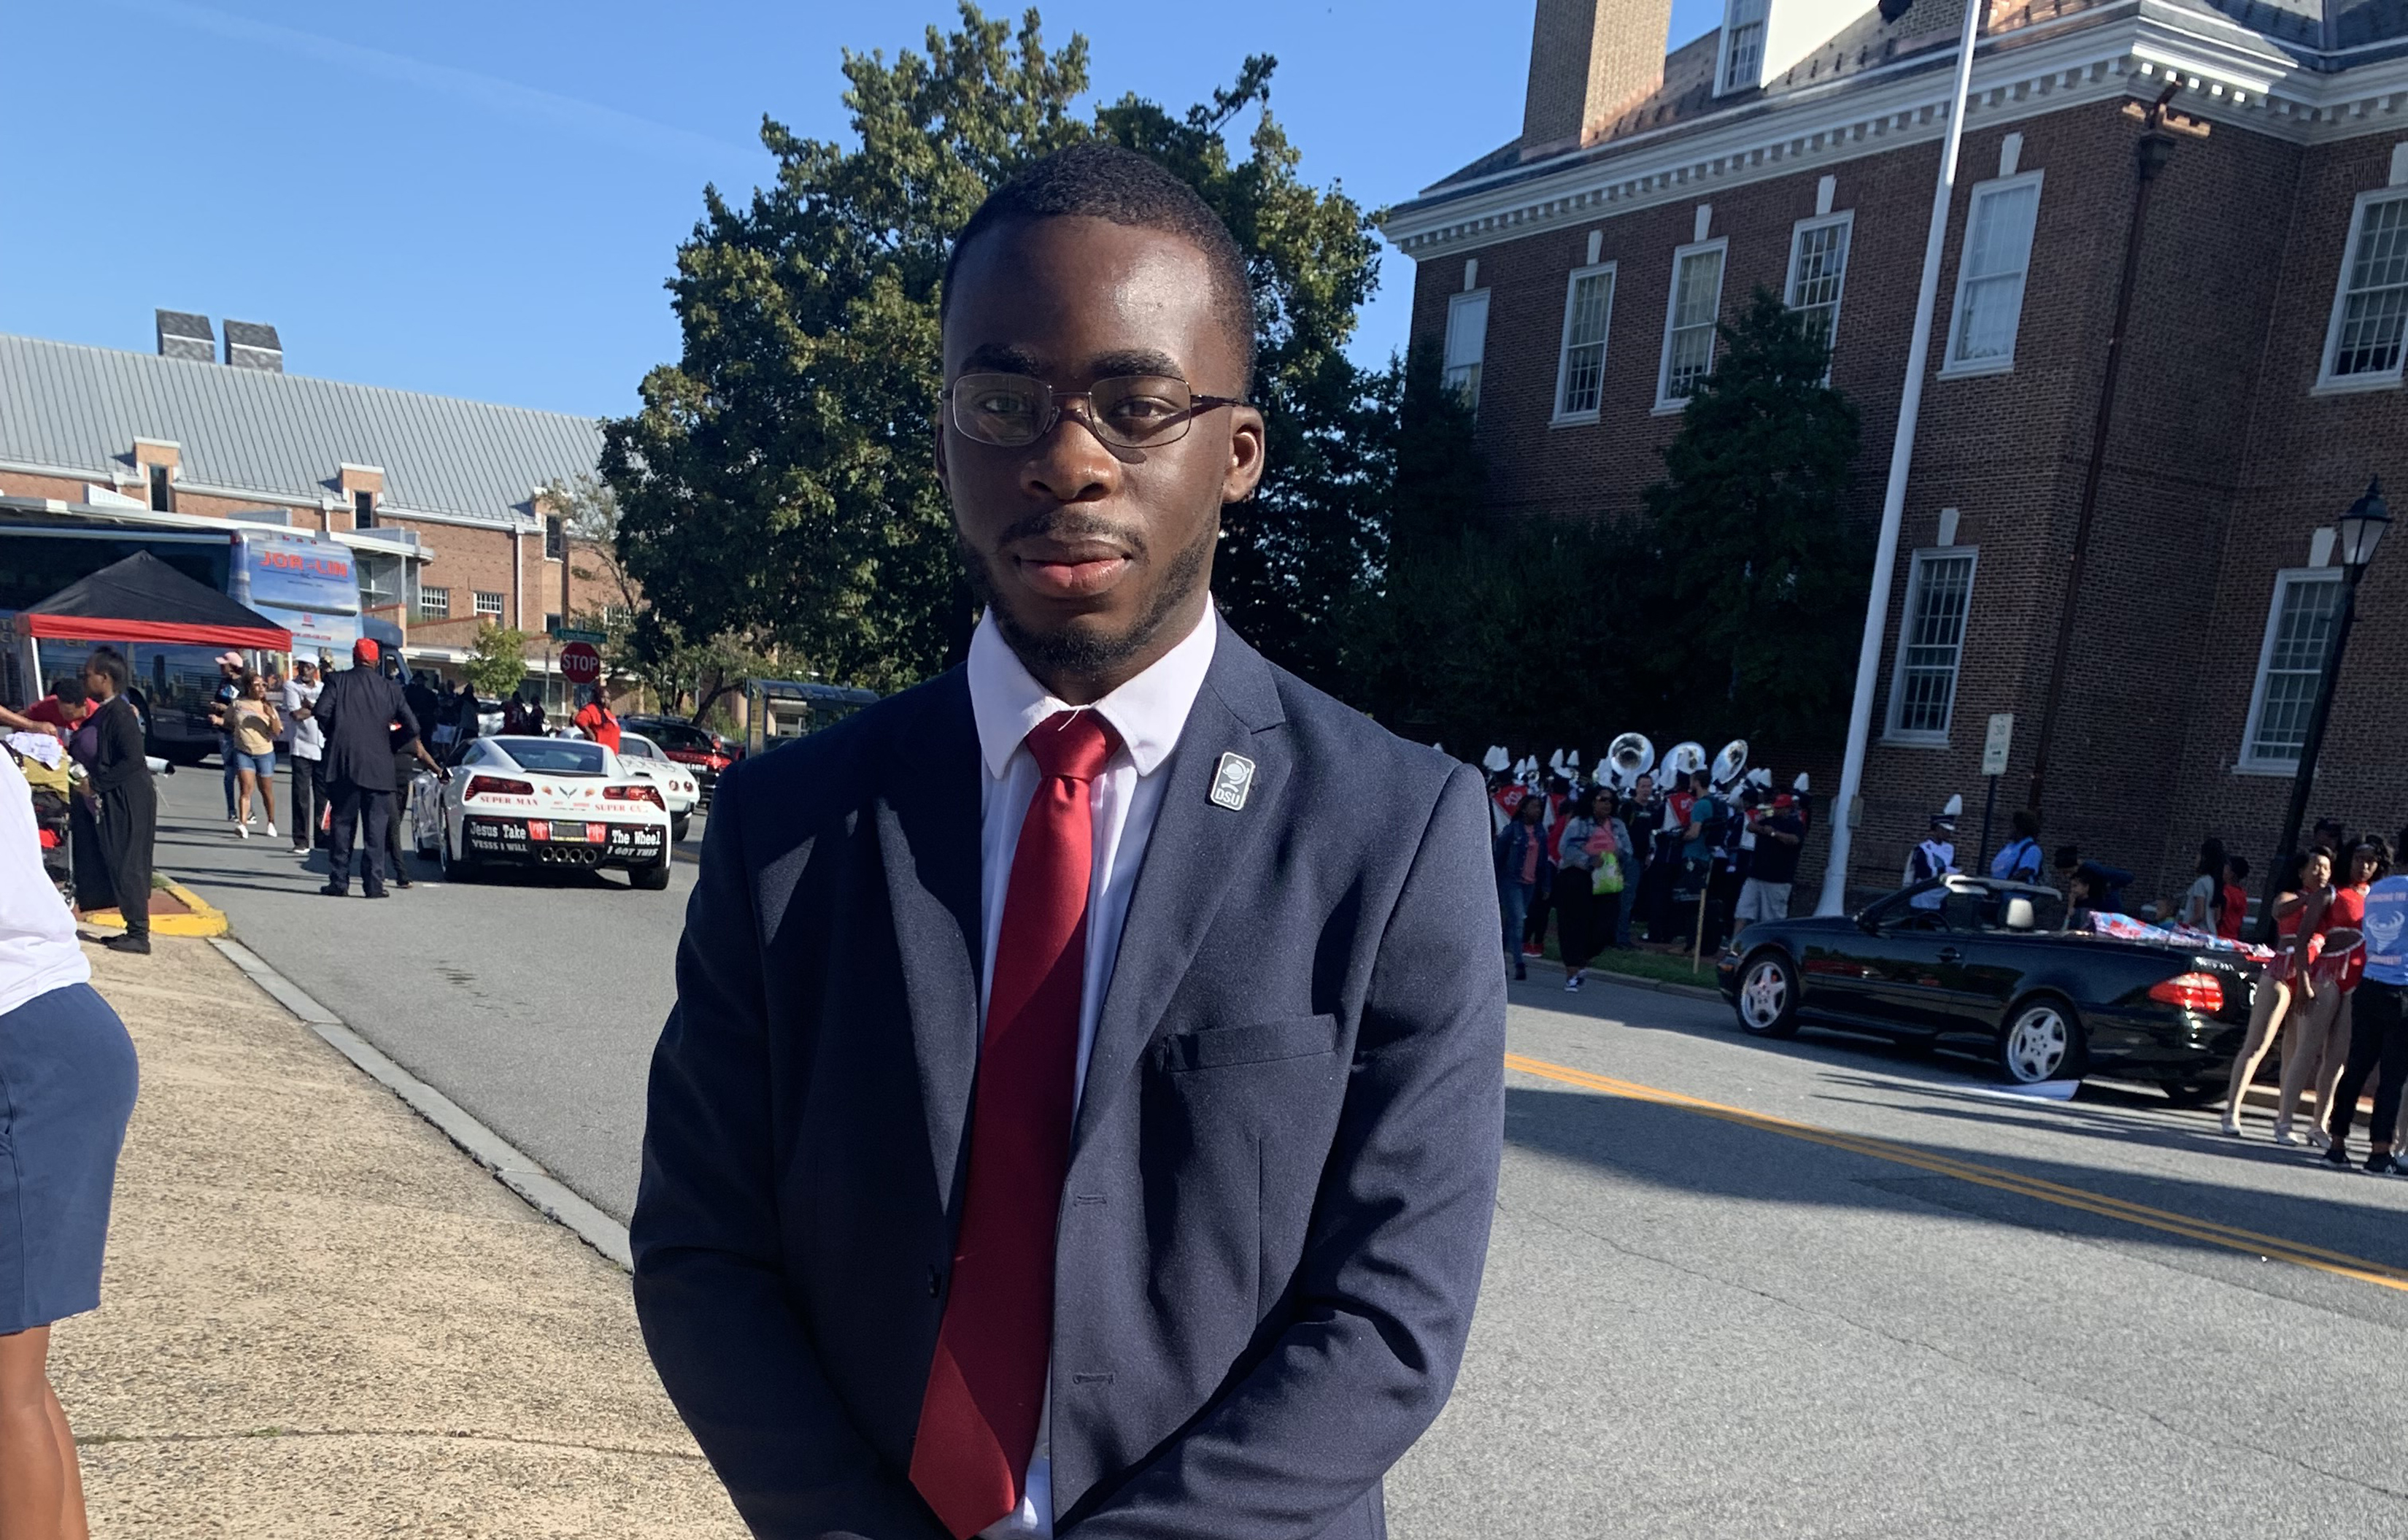 Usman Tijani, who just graduated with a BS in Management/Marketing, will represent Delaware State University on ESPN's The Undefeated celebration of Historically Black Colleges and Universities on the online show "HBCU Day." Mr. Tijani will give an inspiration message along with other top HBCU recent graduates